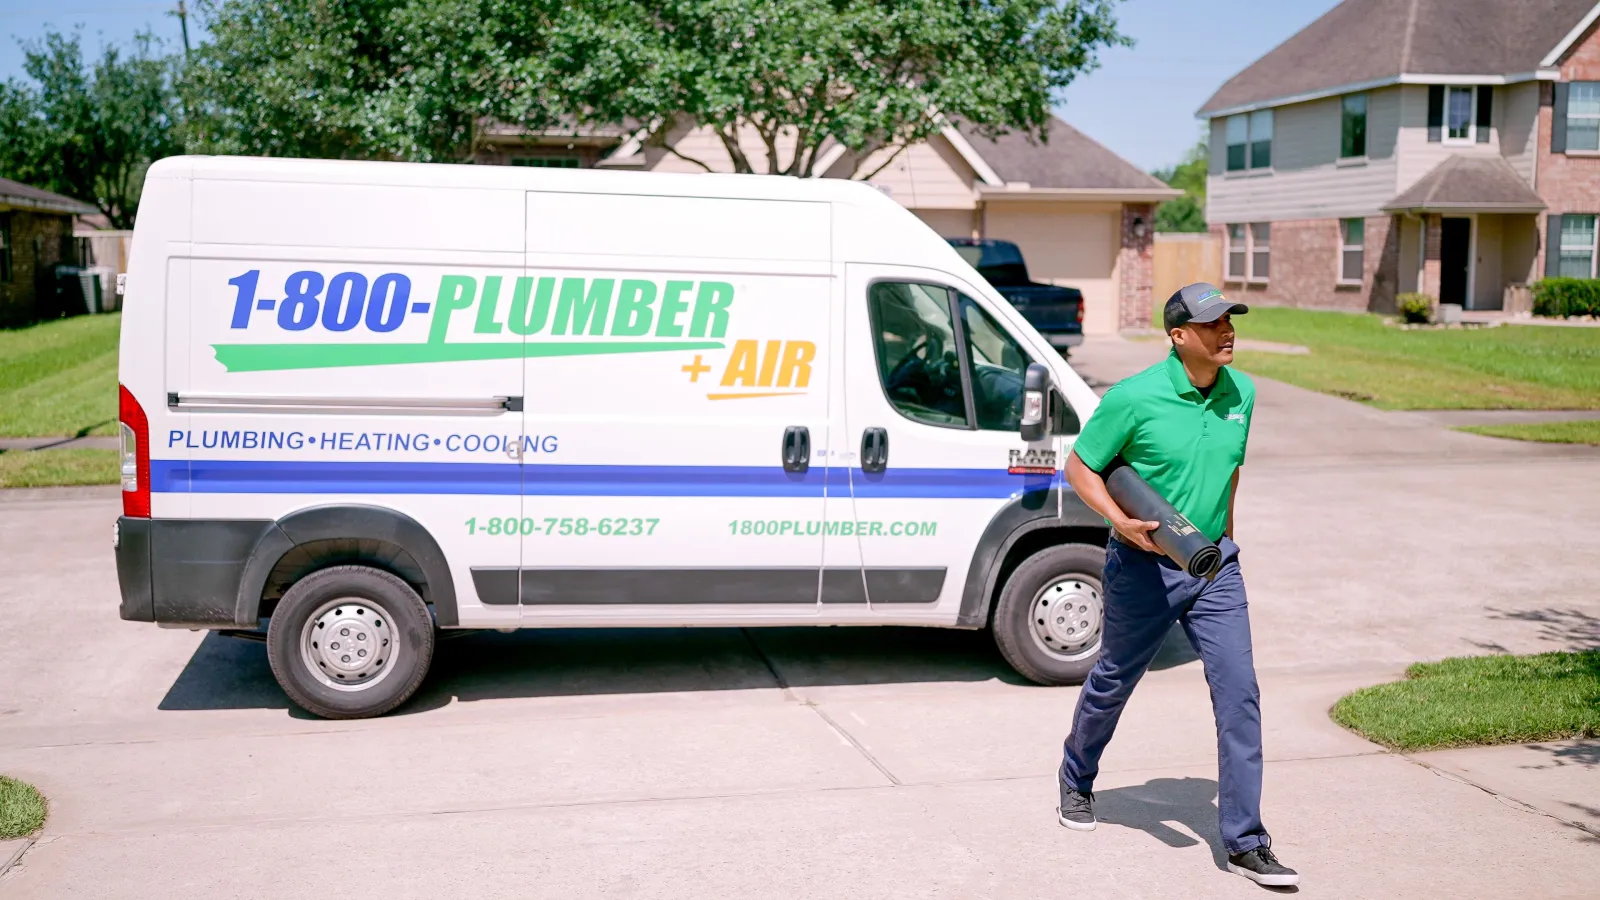 A Northwest Houston plumber entering a house